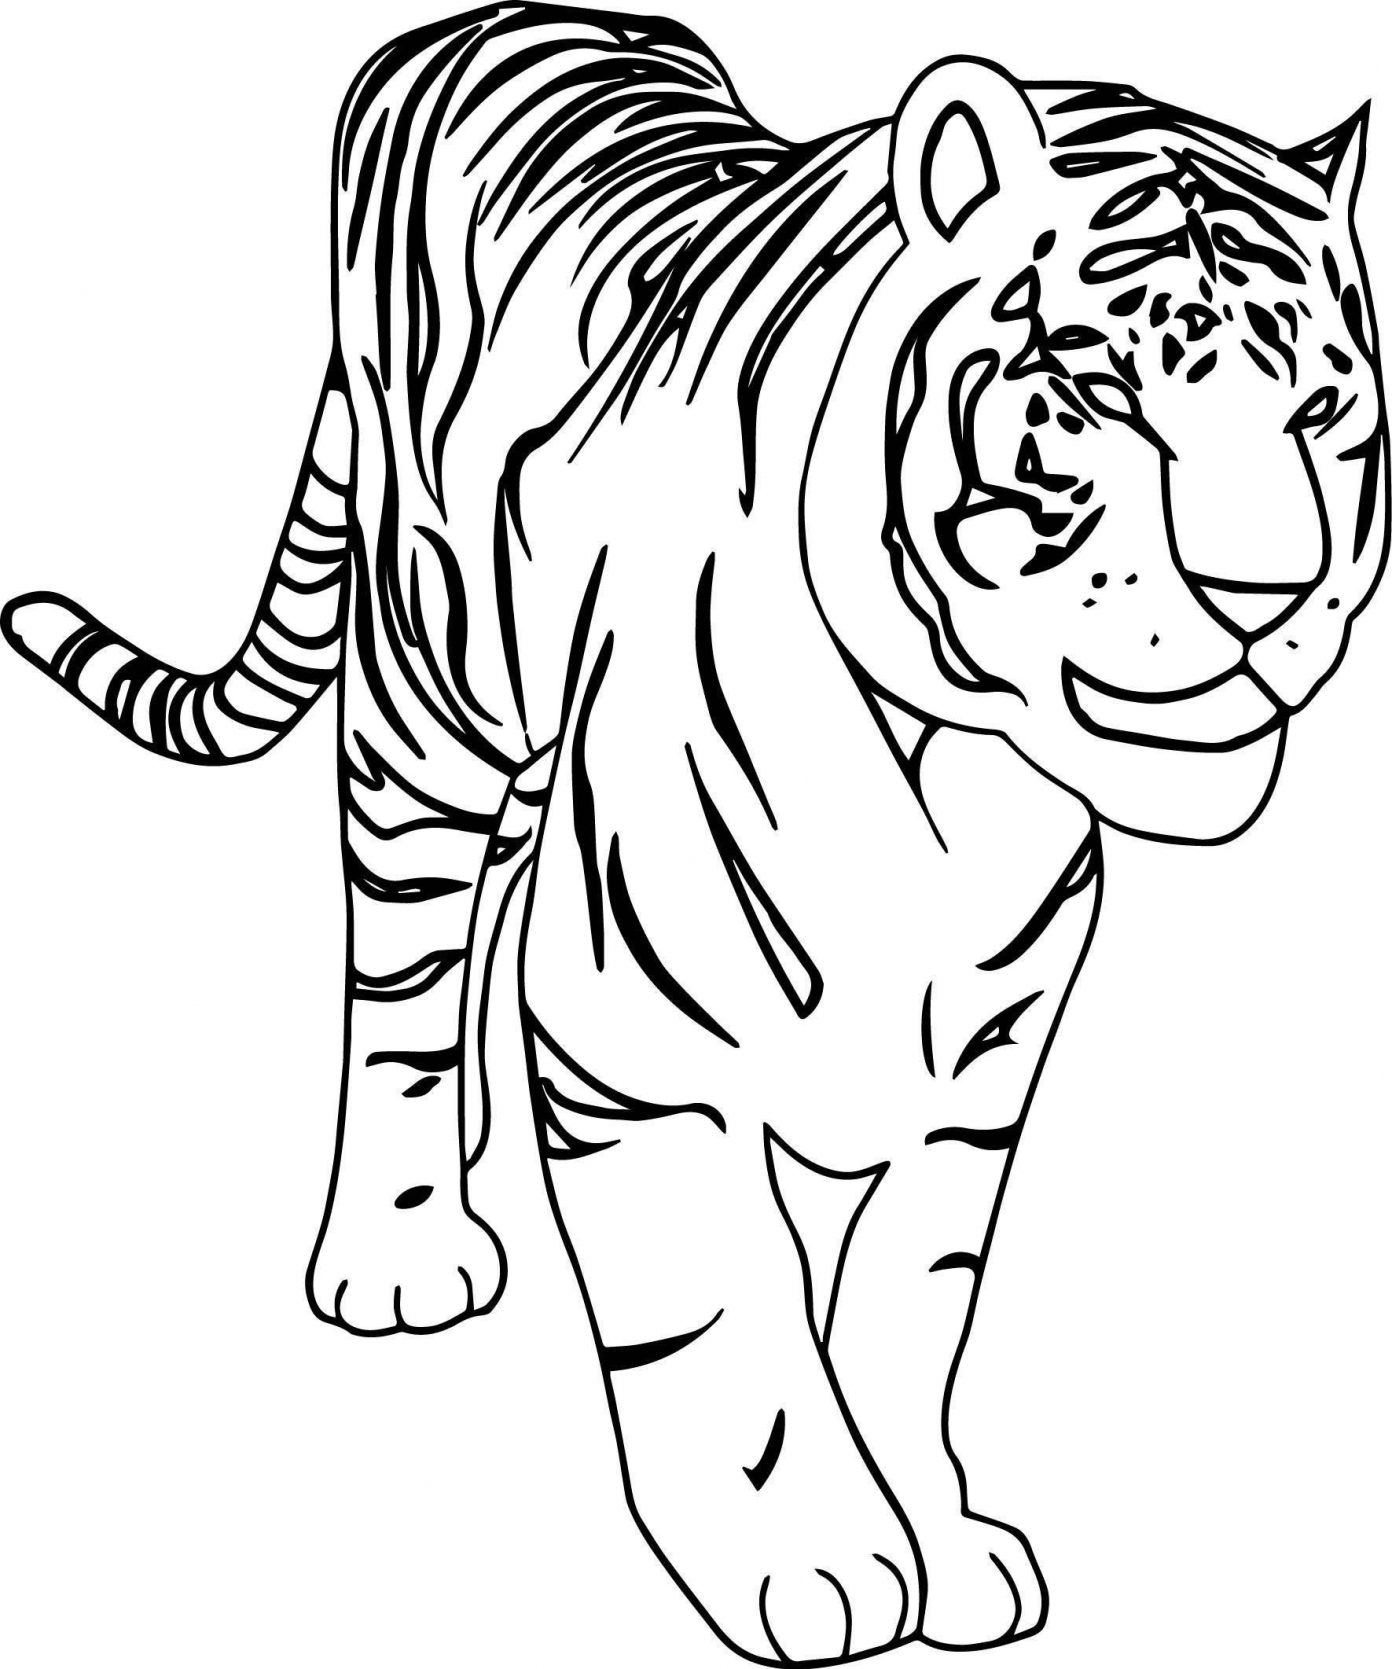 How to draw a simple and beautiful tiger  The most beautiful simple tiger  drawing  YouTube